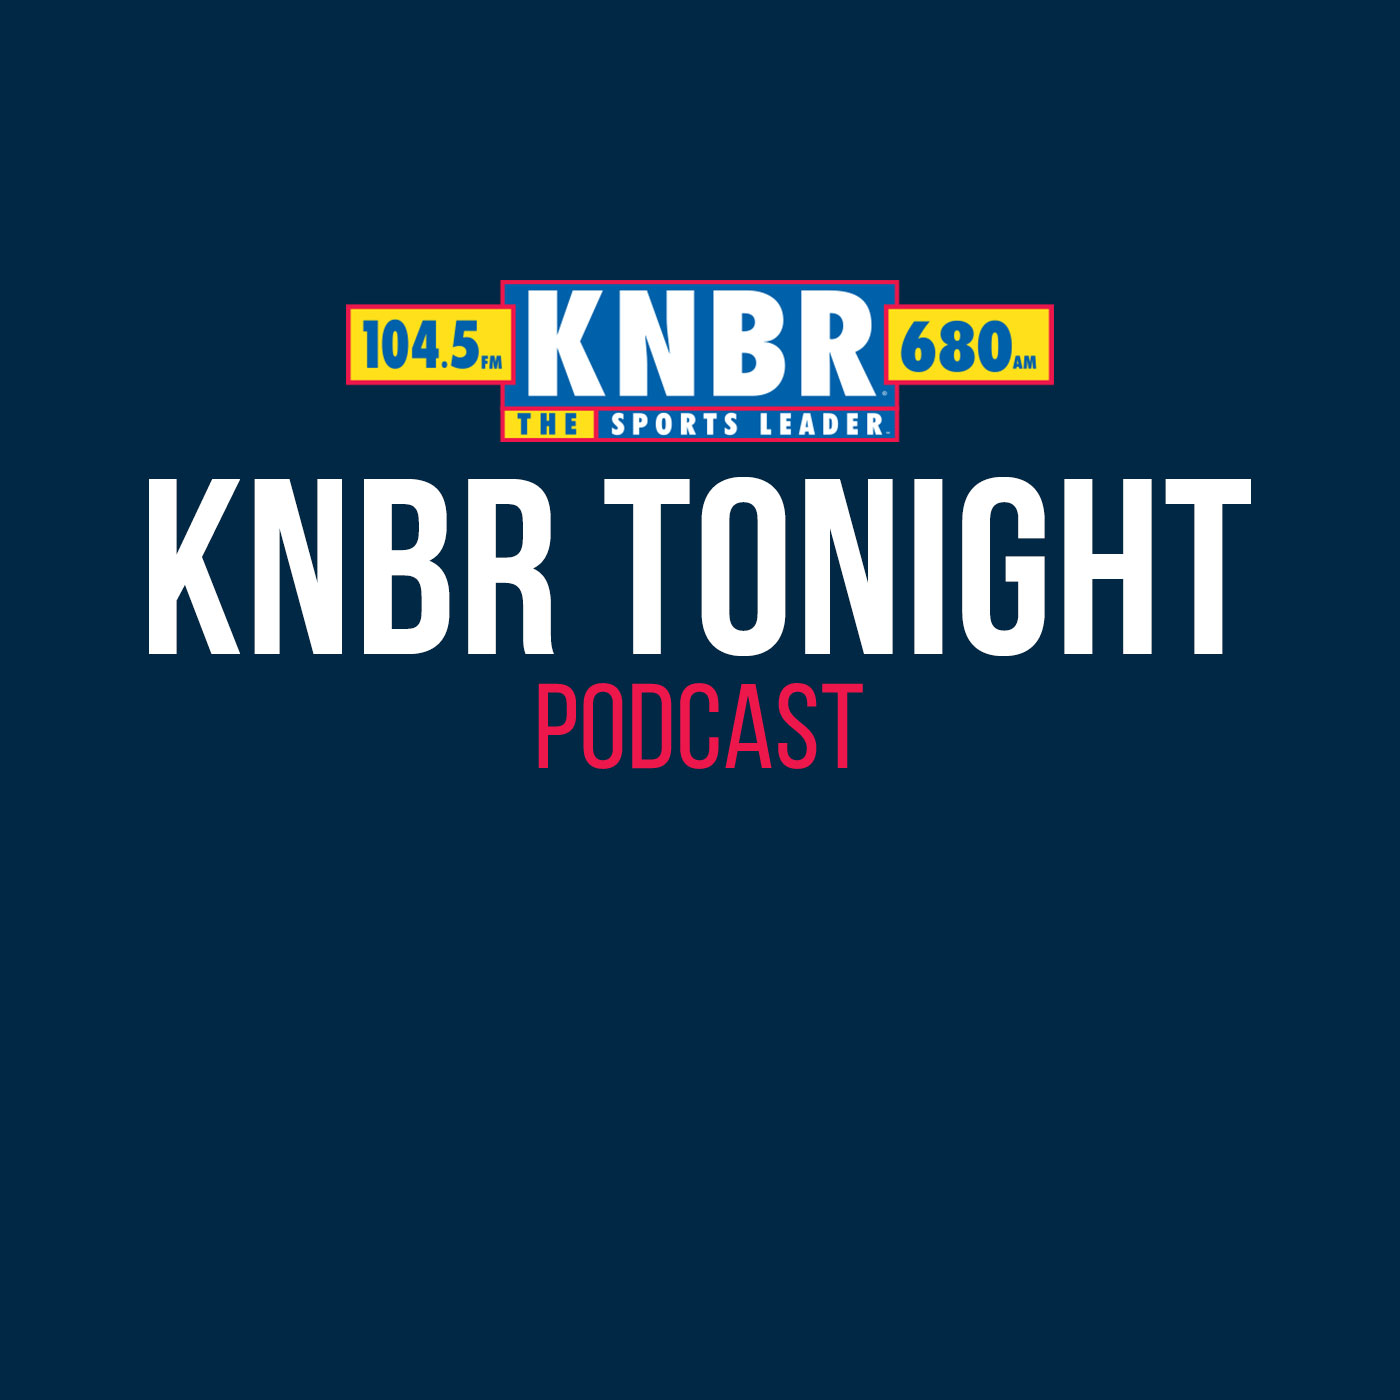 3-4 Evan Webeck joins KNBR Tonight with Dieter to talk about the slumping Warriors